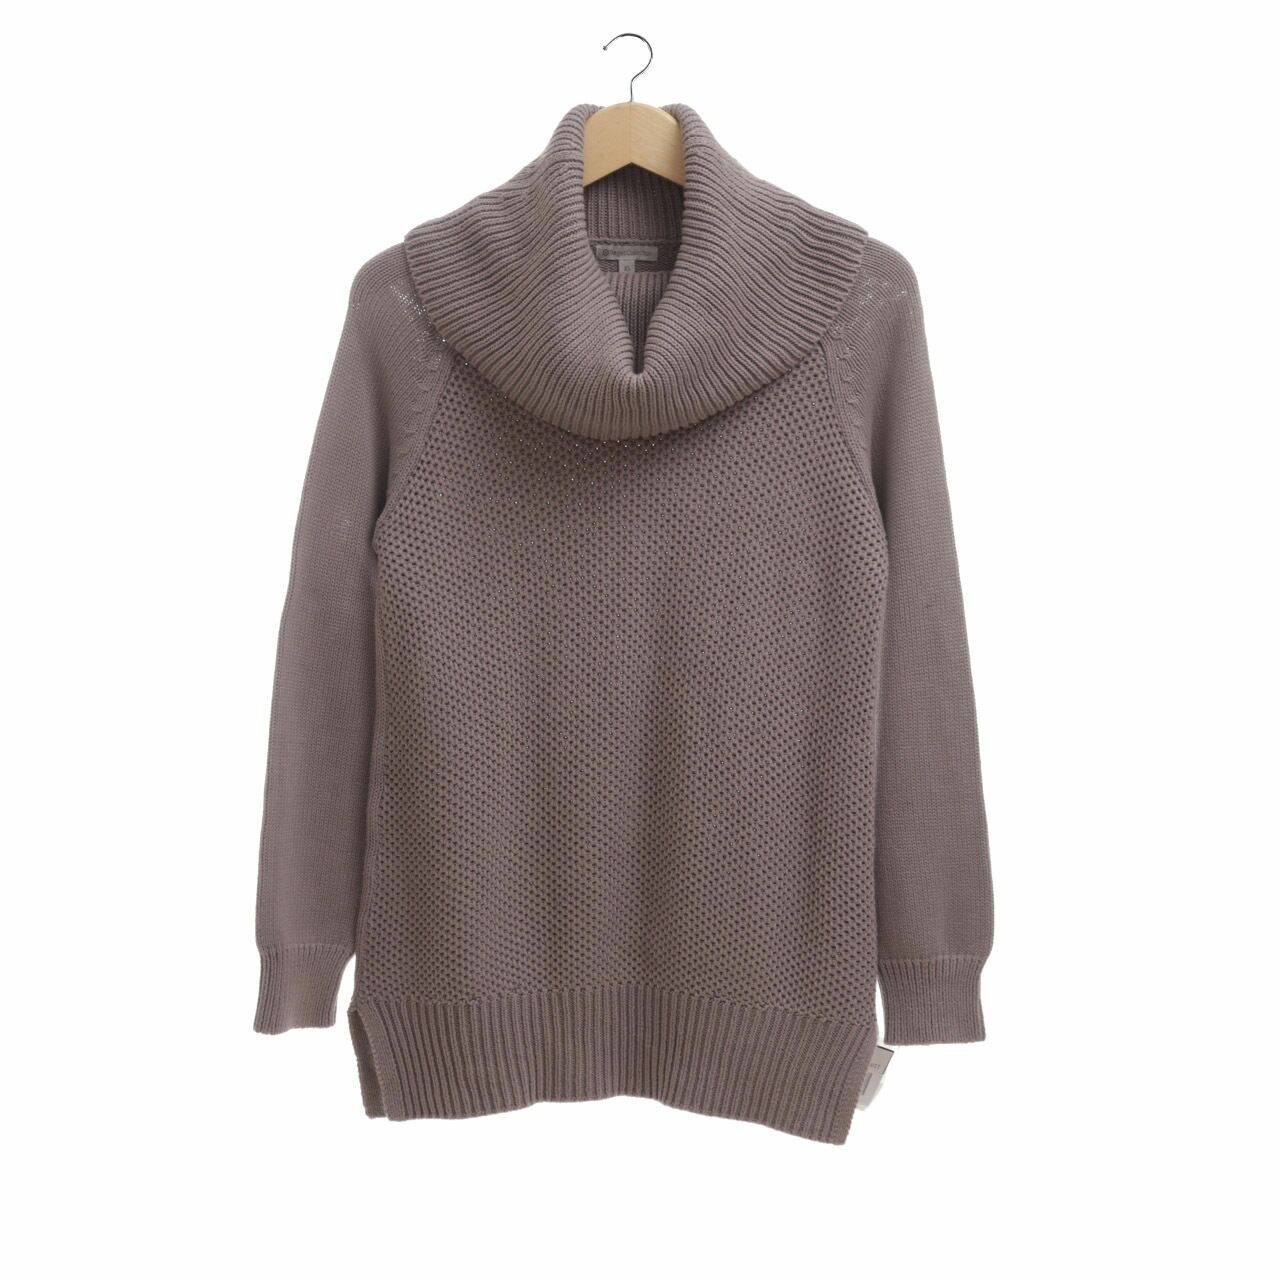 target Taupe Knit Sweater